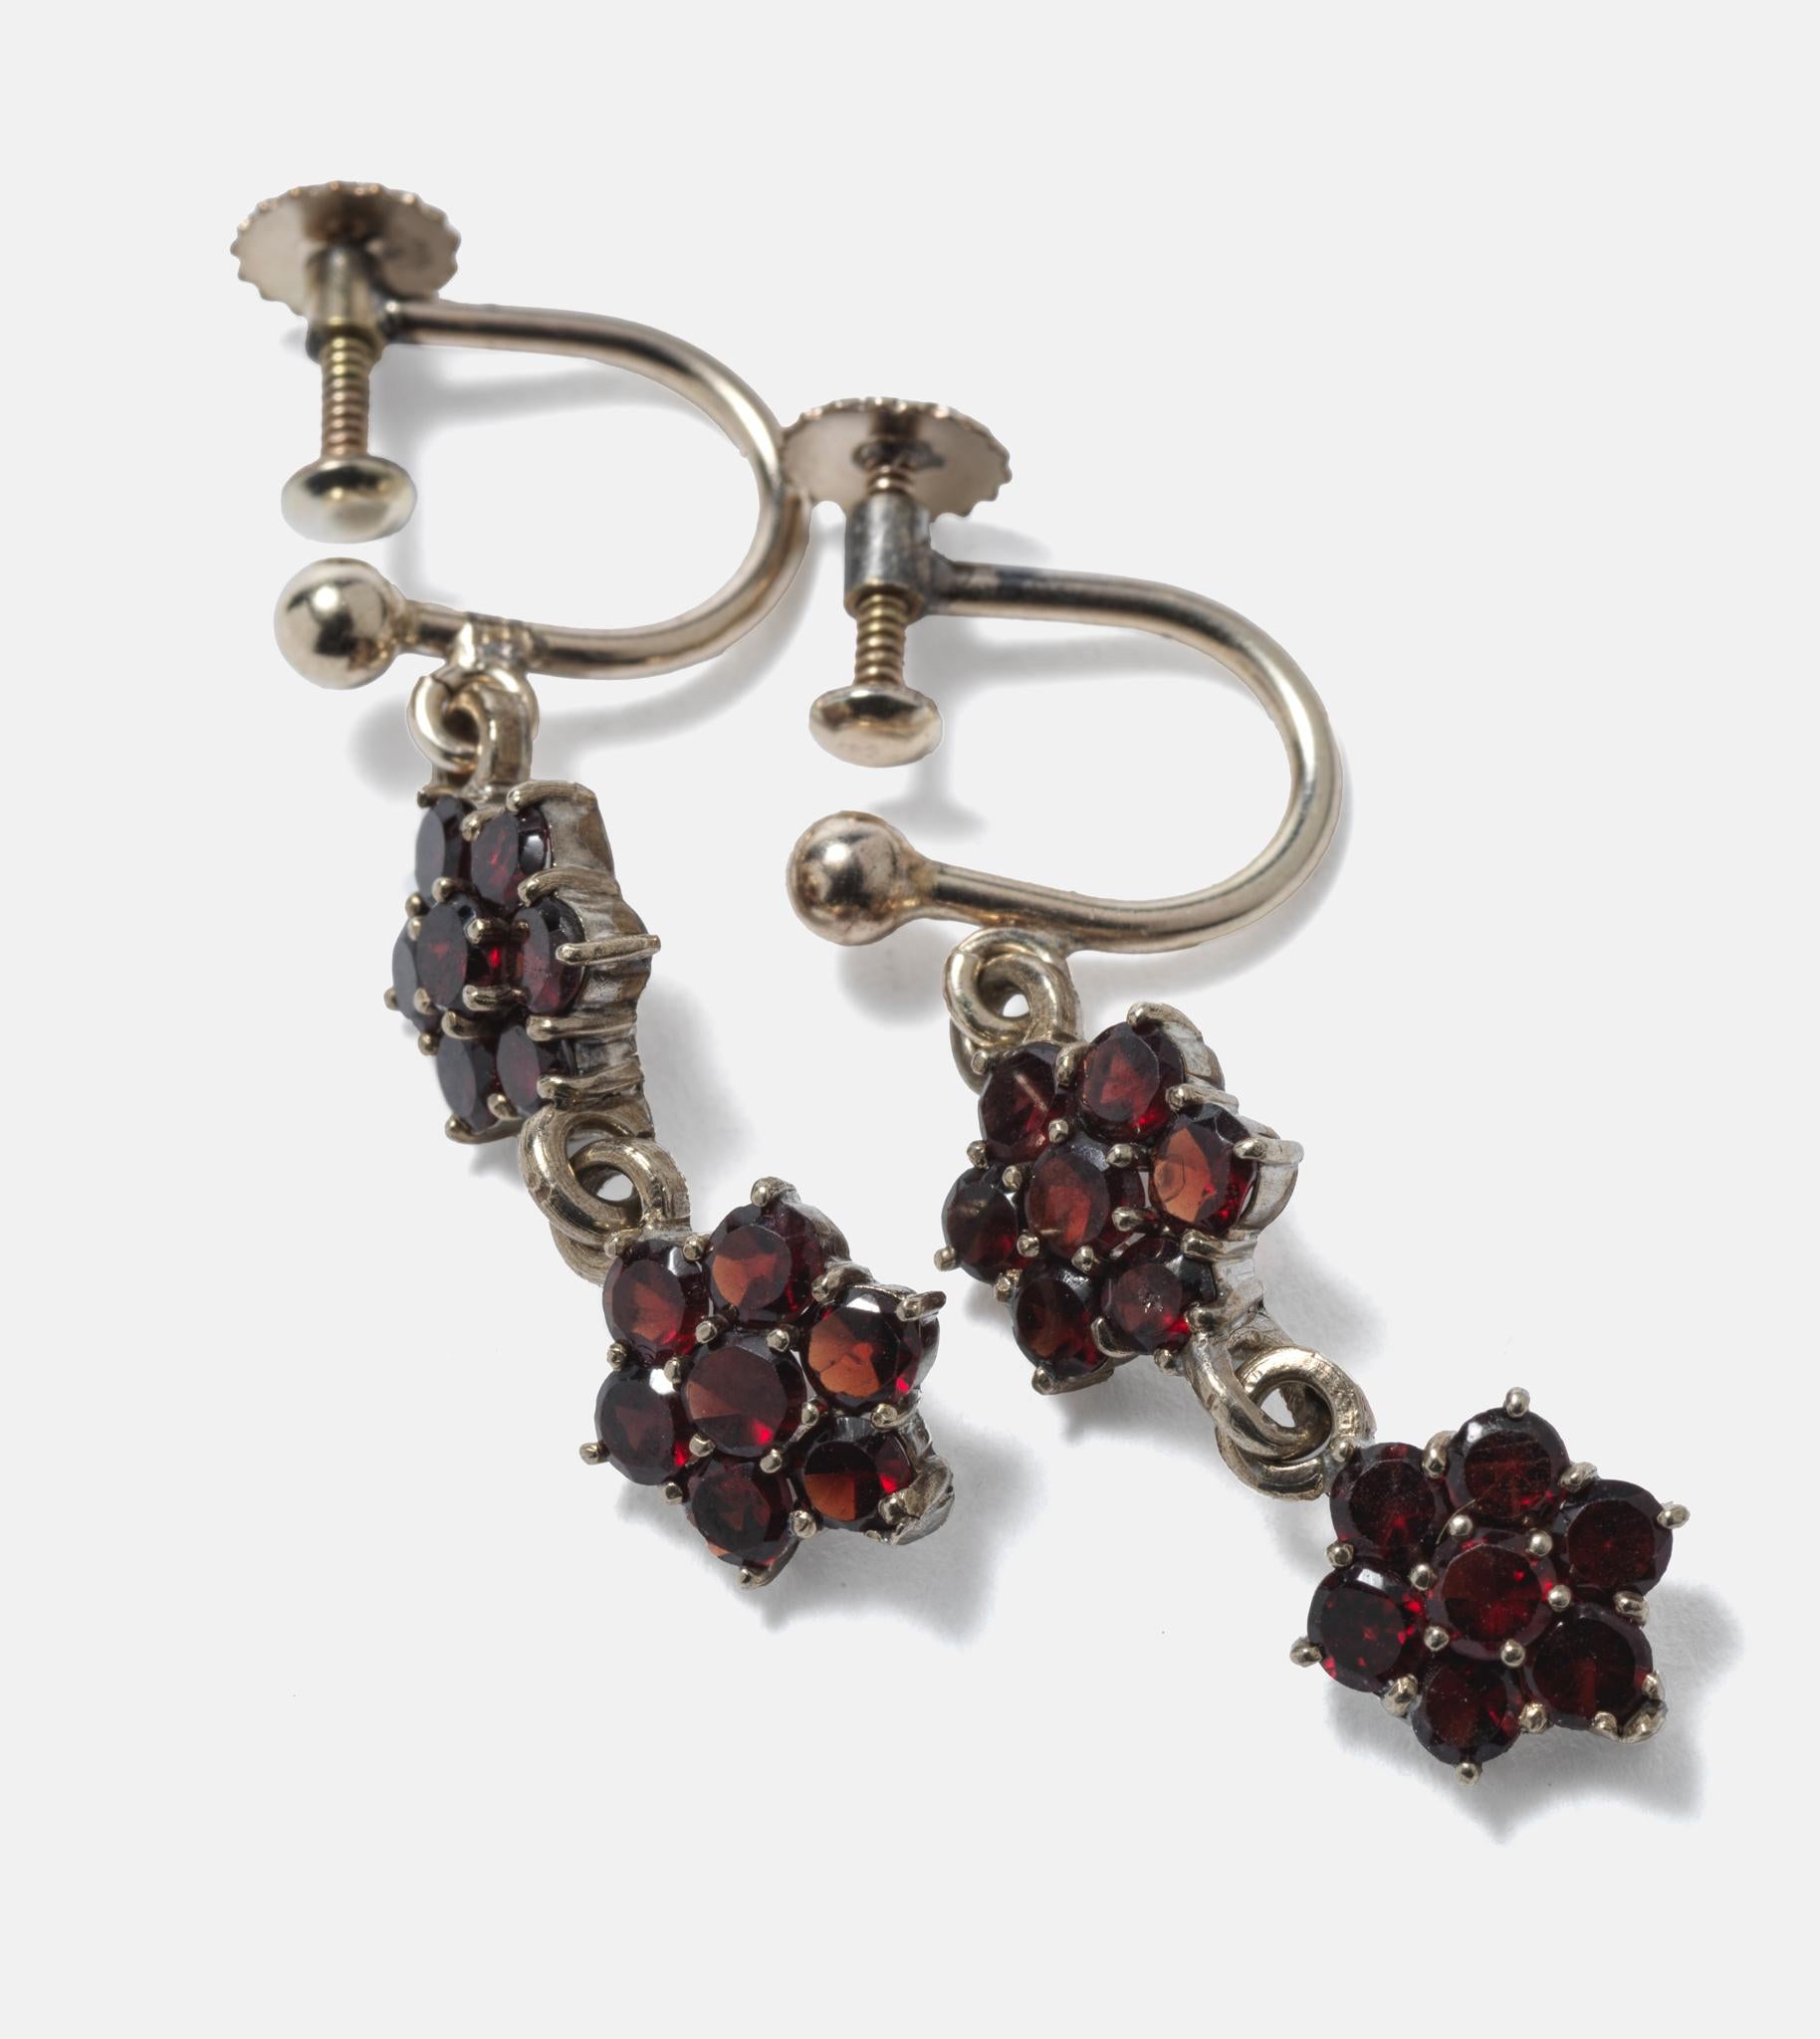 Antique pair of earrings. Silver and garnets. For Sale 1